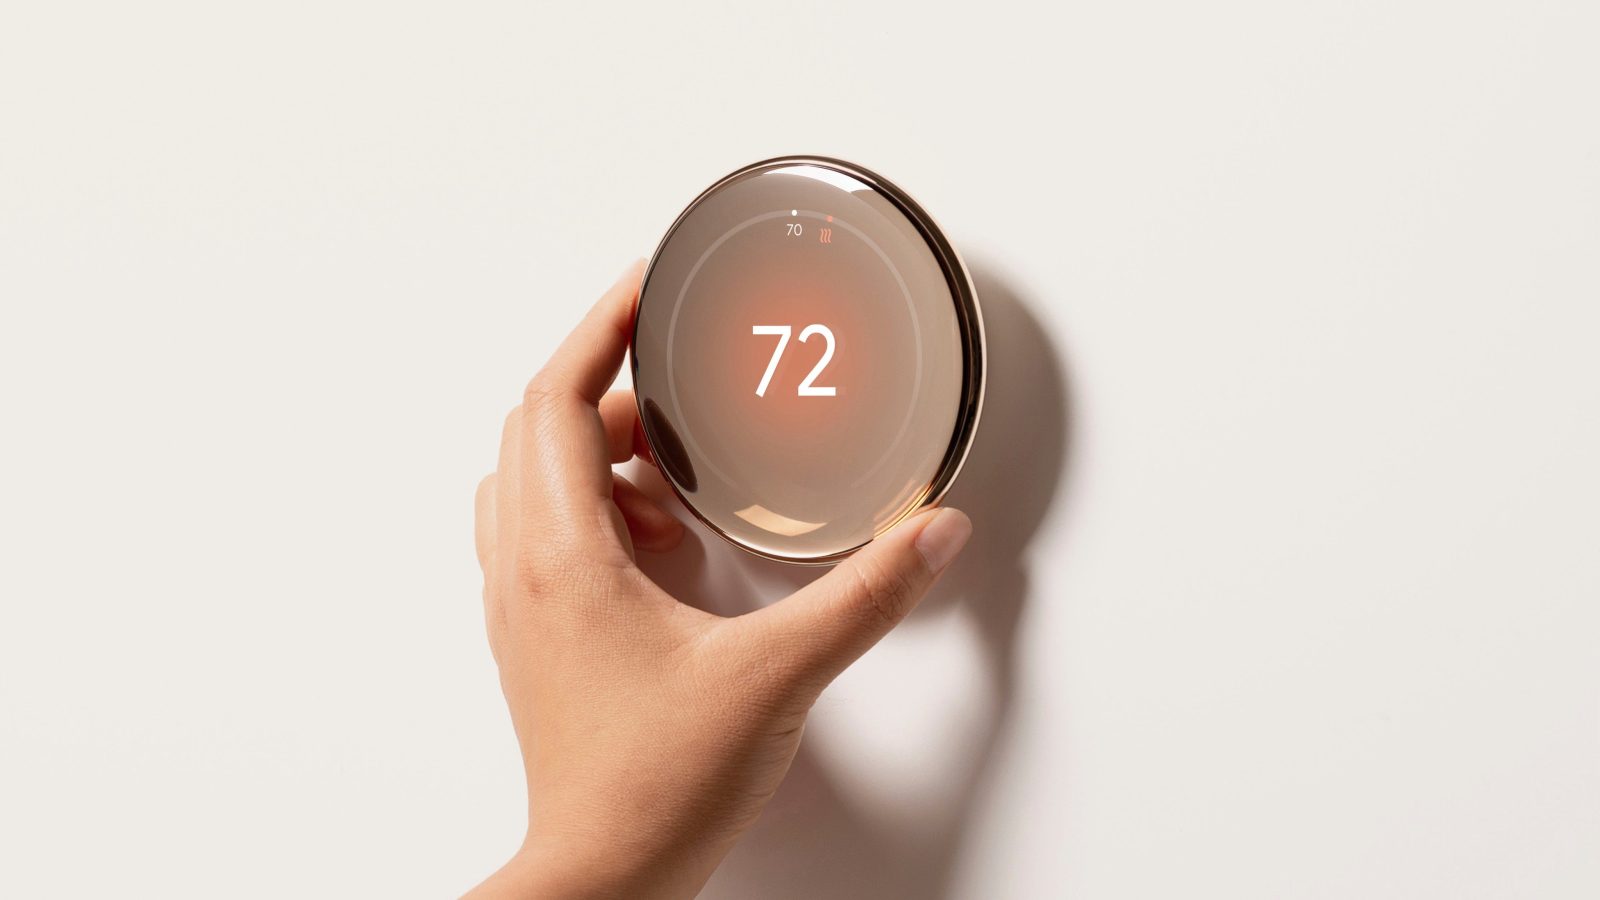 New Nest Learning Thermostat gets early unboxing [Video]